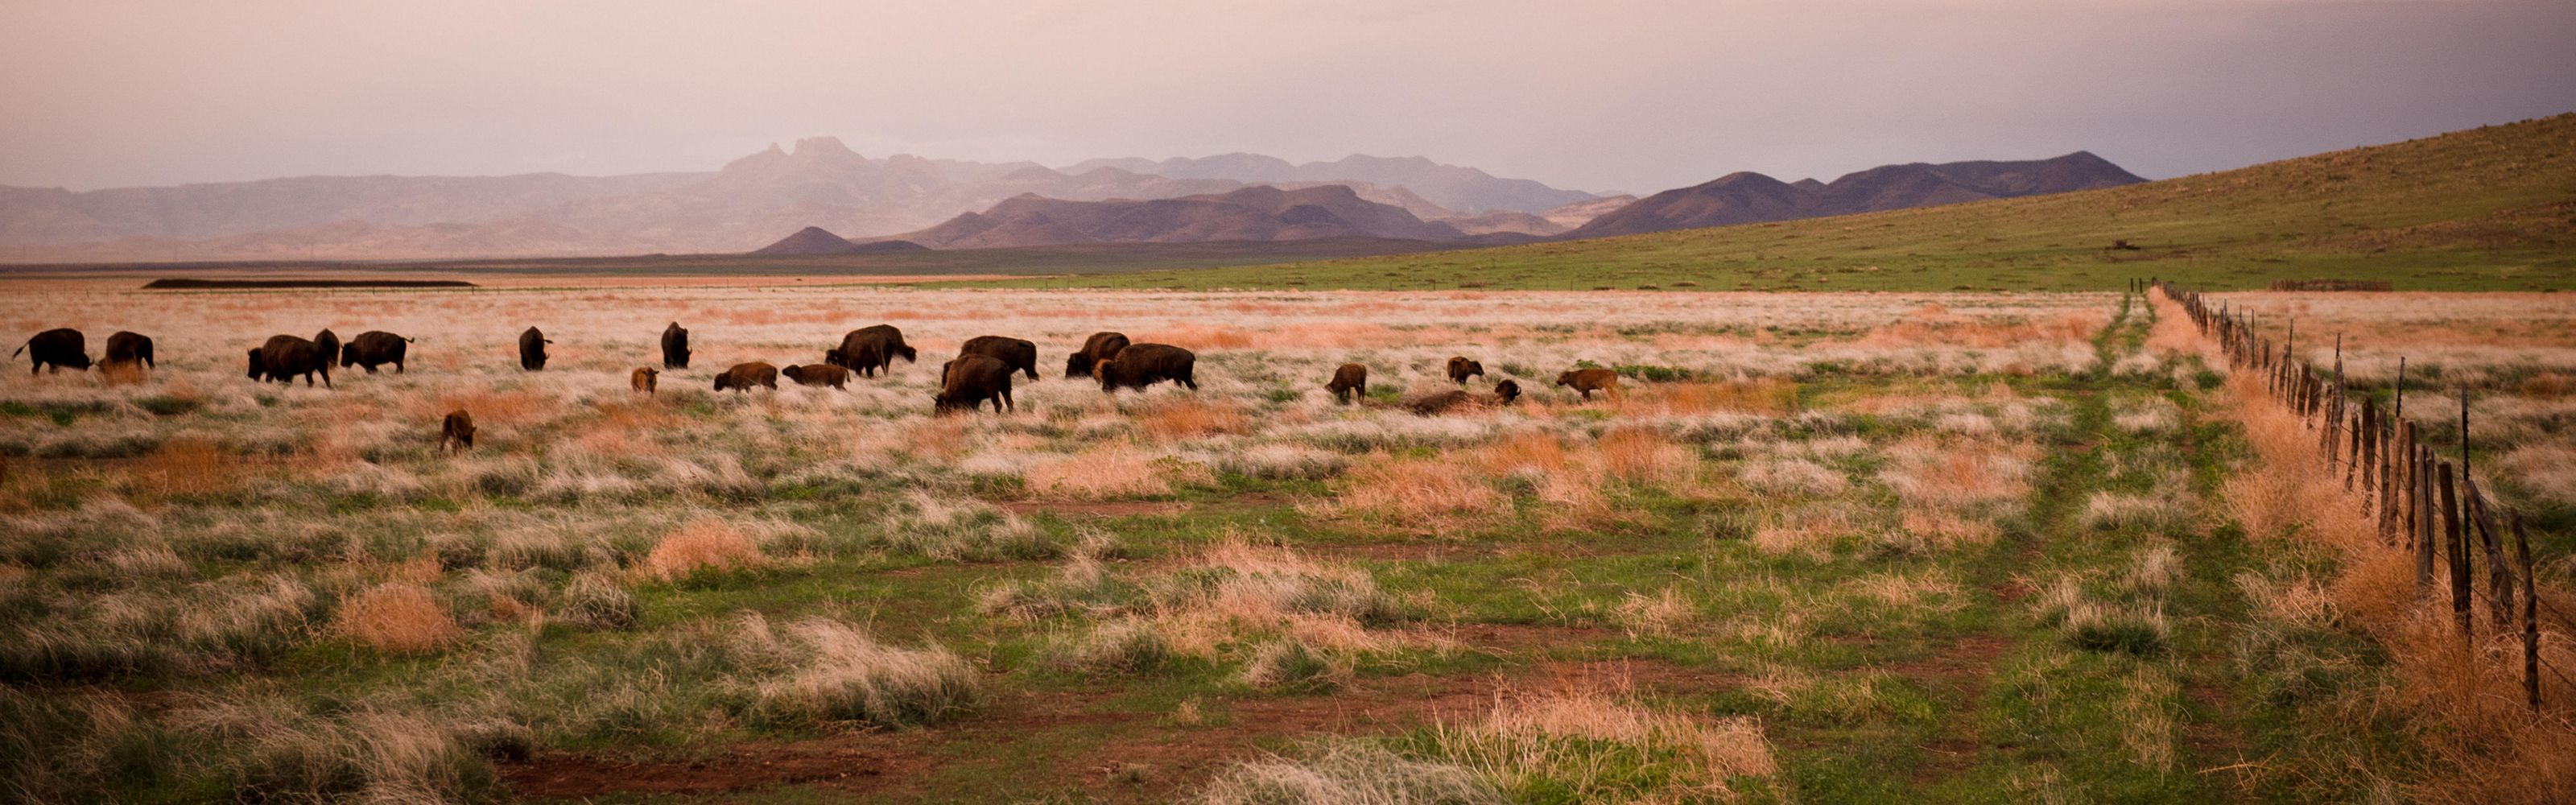 23 bison were reintroduced at El Uno Ecological Reserve in November of 2009, a donation of the Wind Cave National Park, South Dakota.